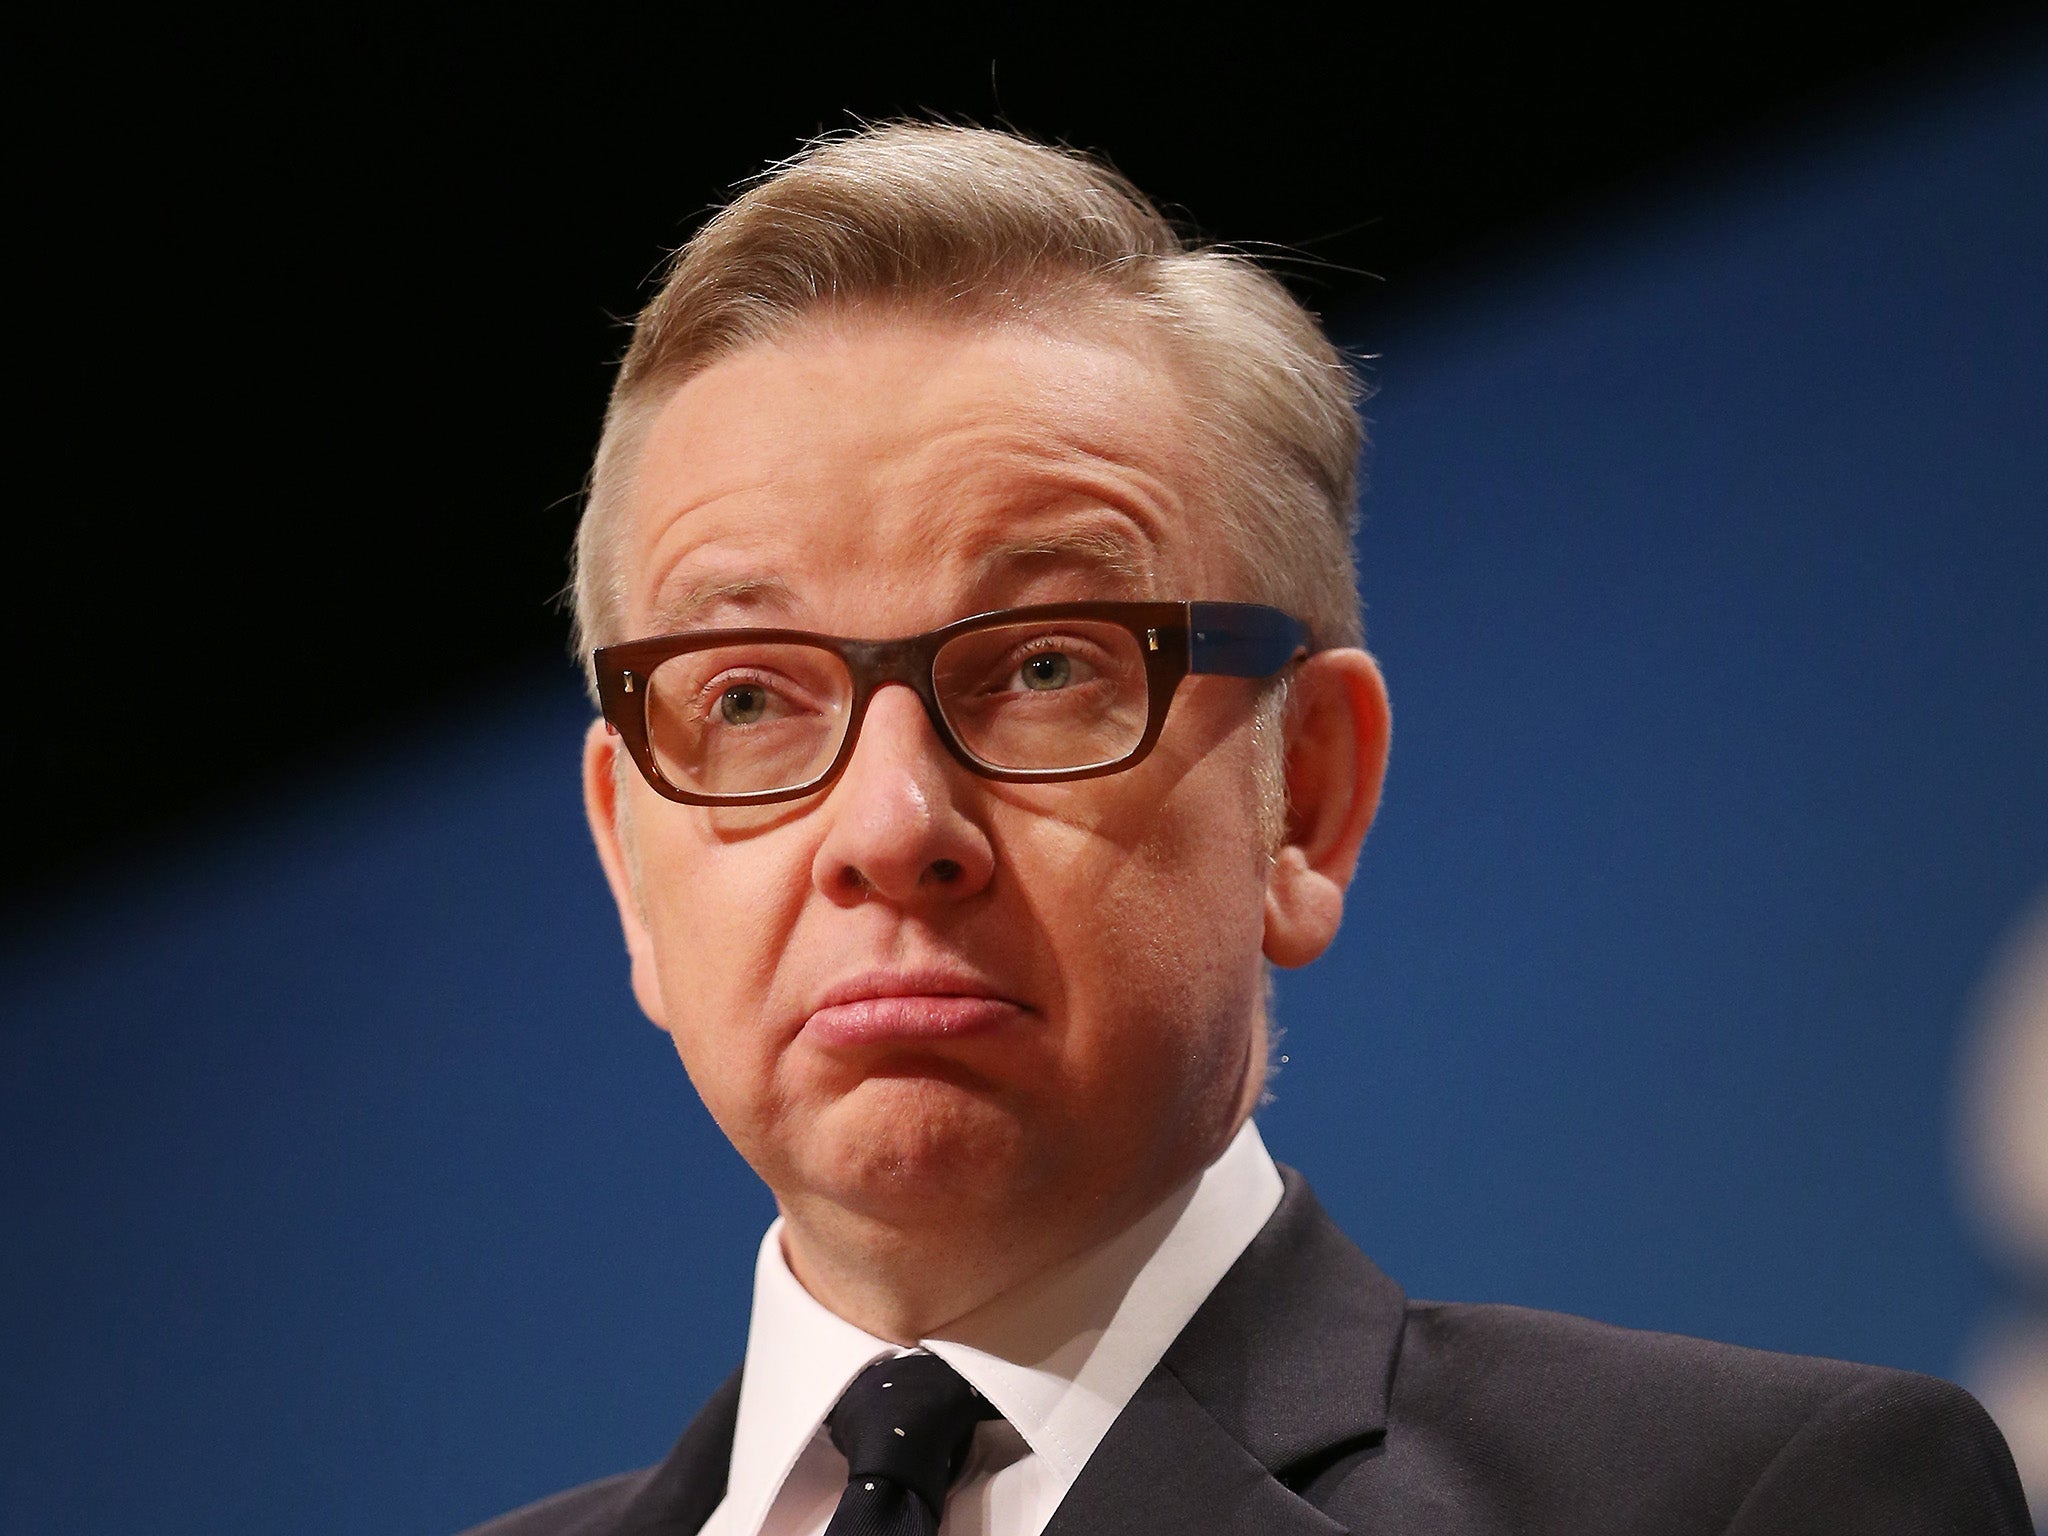 Michael Gove is an active proponent of academies